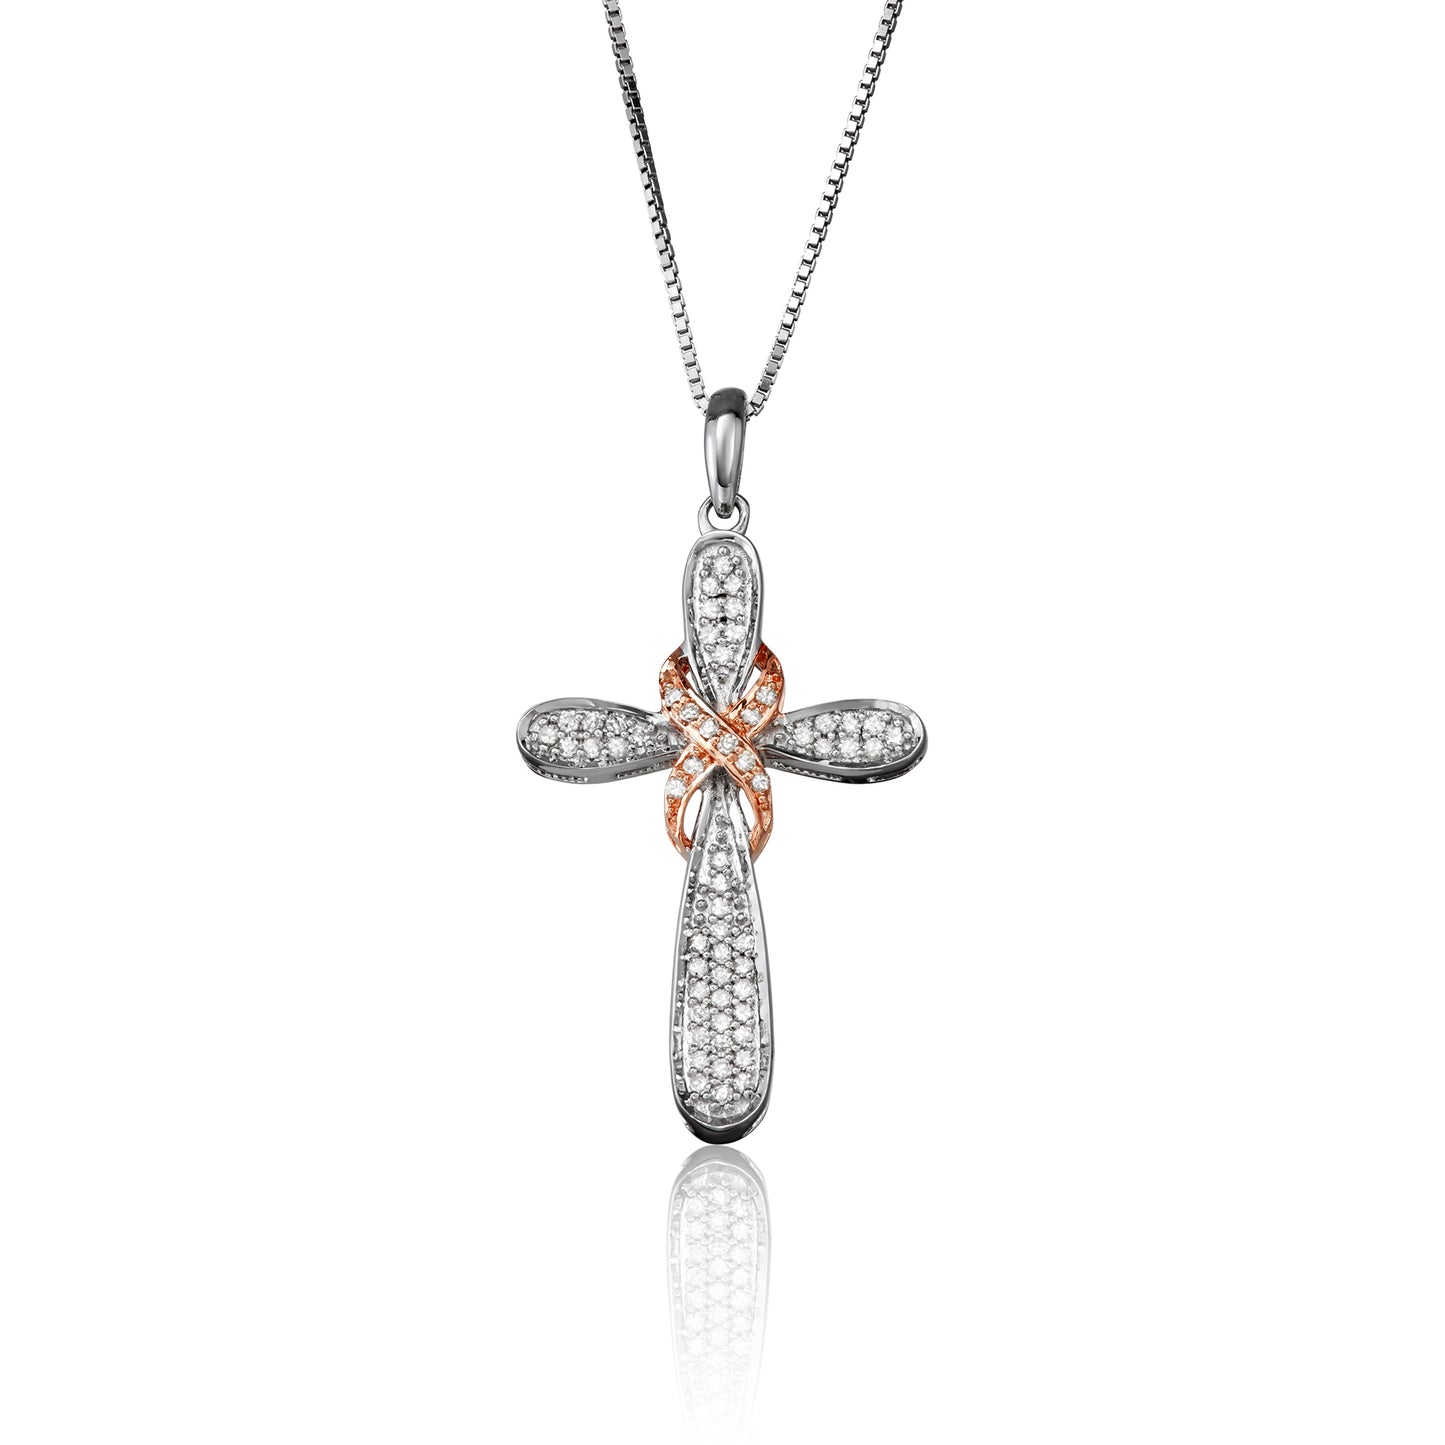 Rose Gold-Plated Sterling Silver 0.24 ct TDW White Diamond Fancy Cross Necklace